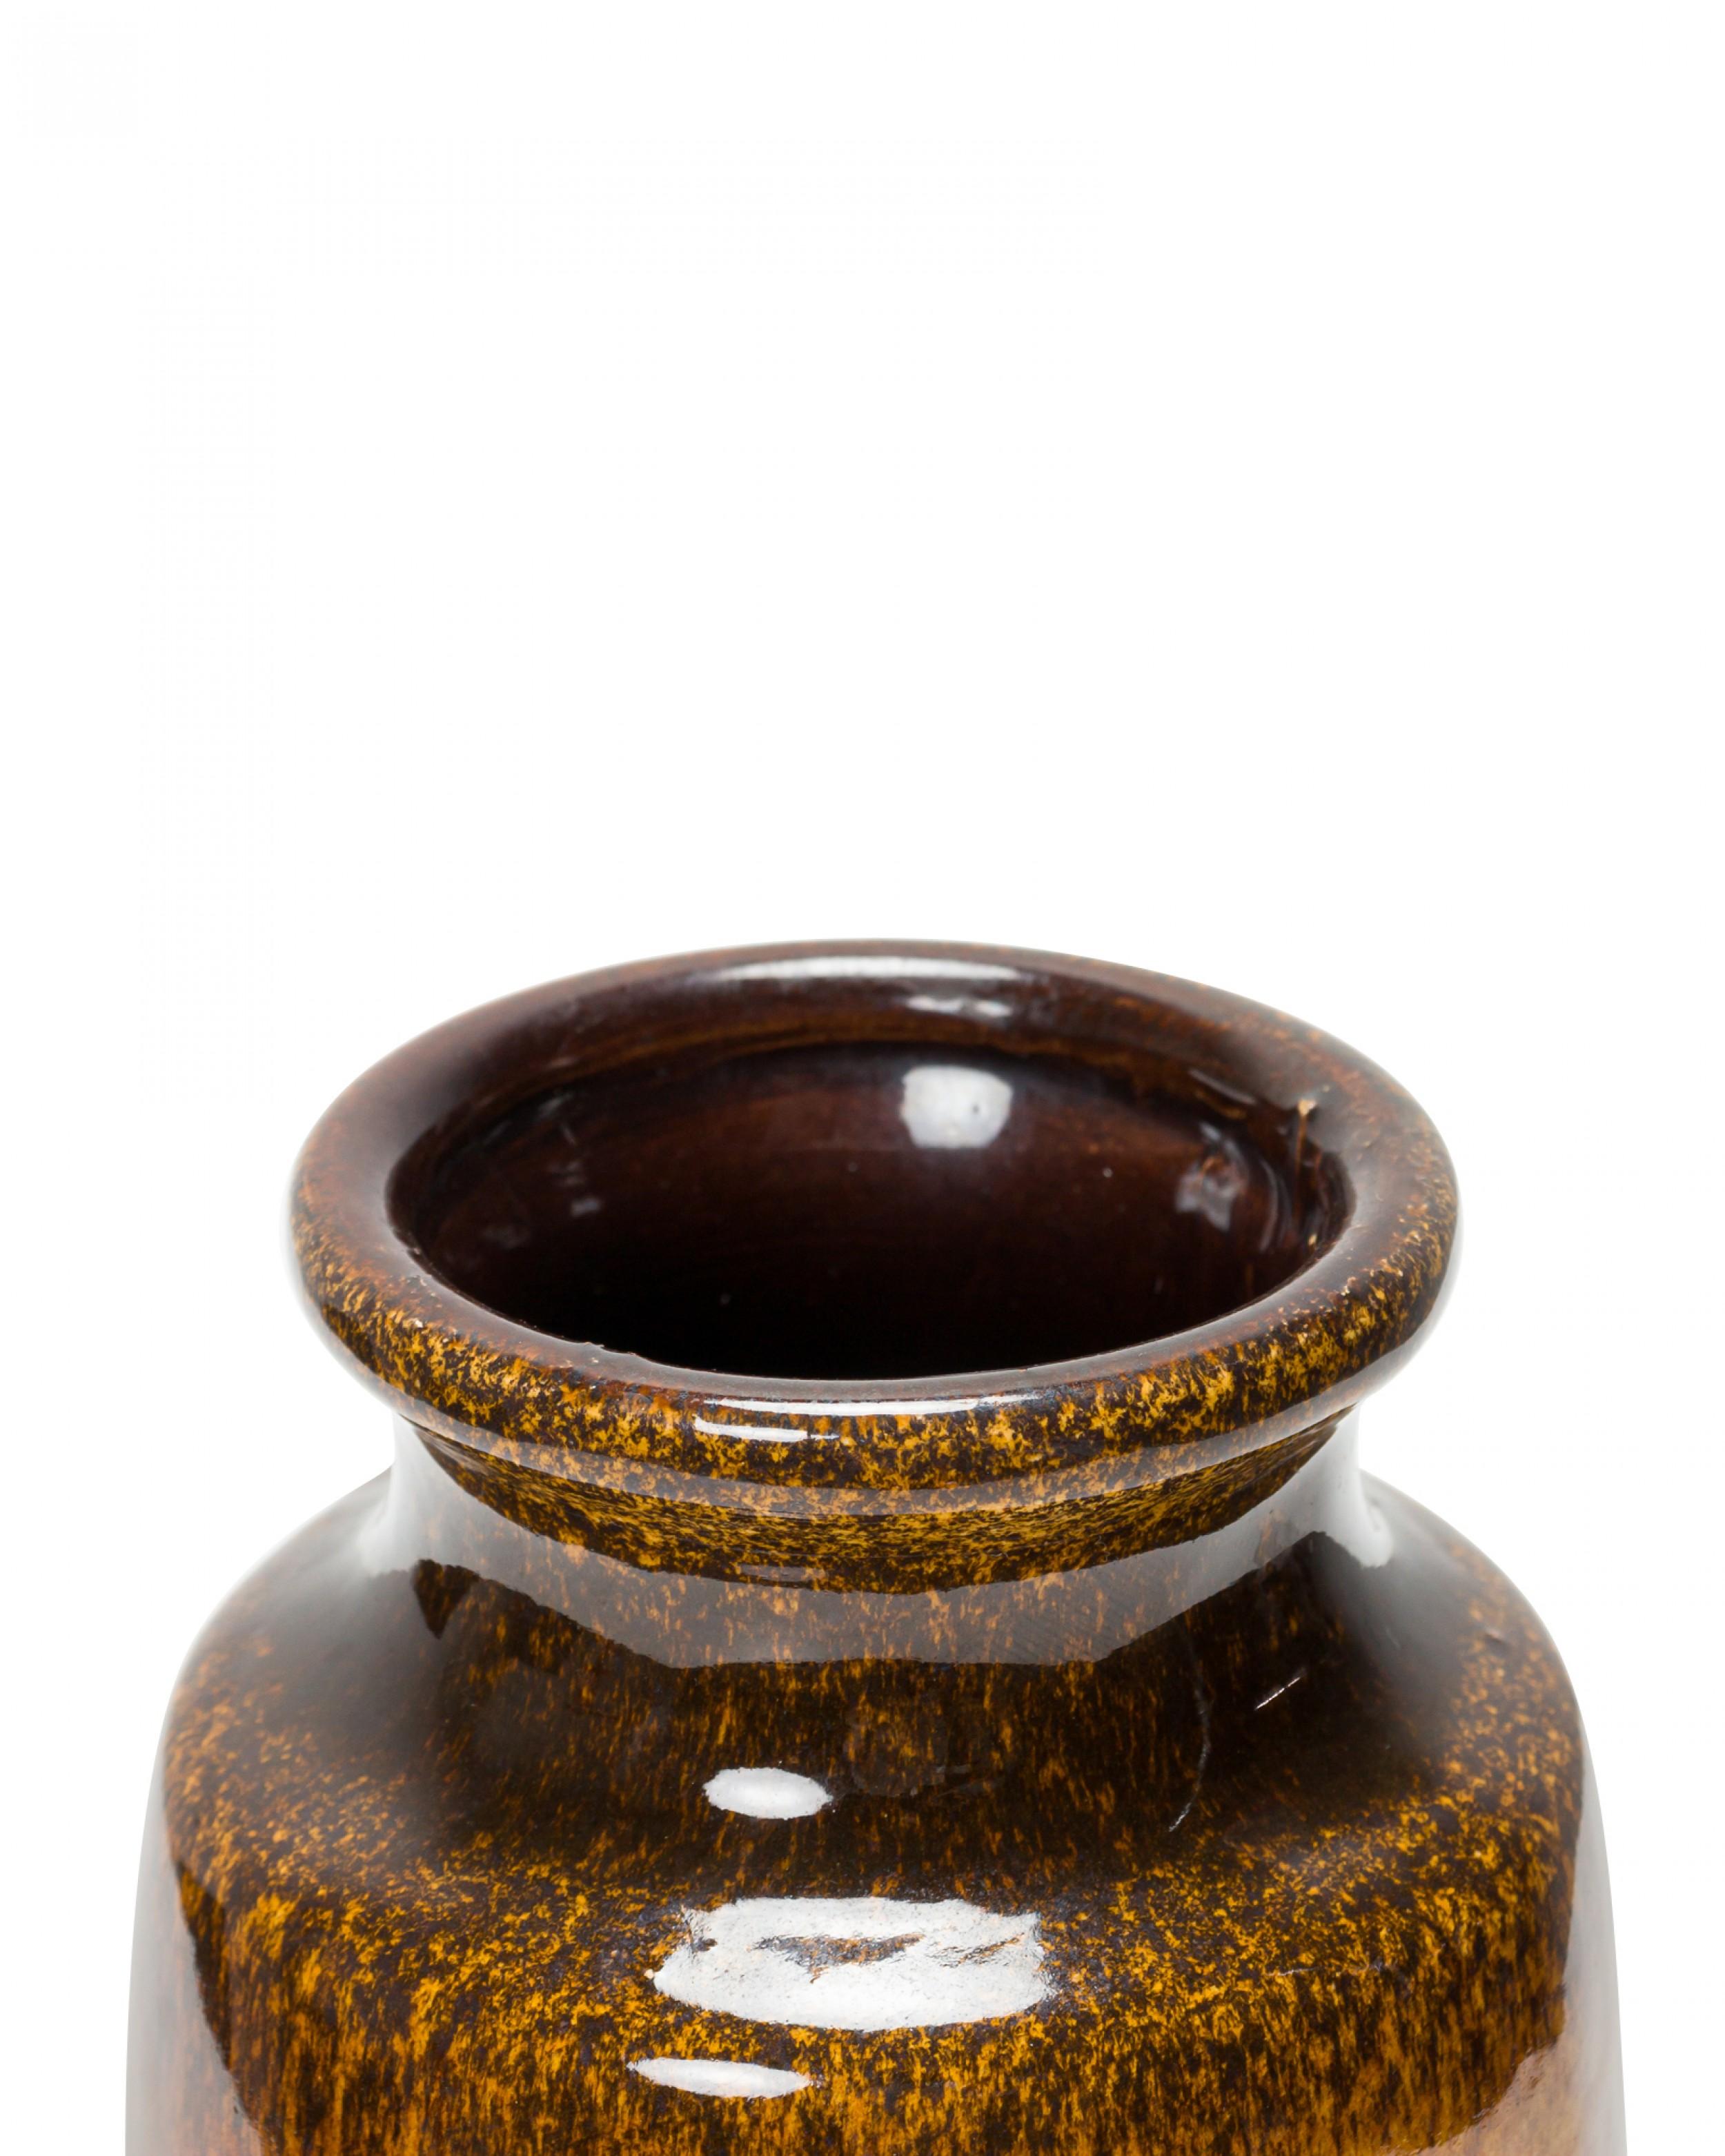 West German mid-century urn-form ceramic vase with a decorative red band around the body against a deep brown glazed ground. (SCHEURICH, mark on bottom, W. Germany 213-20).